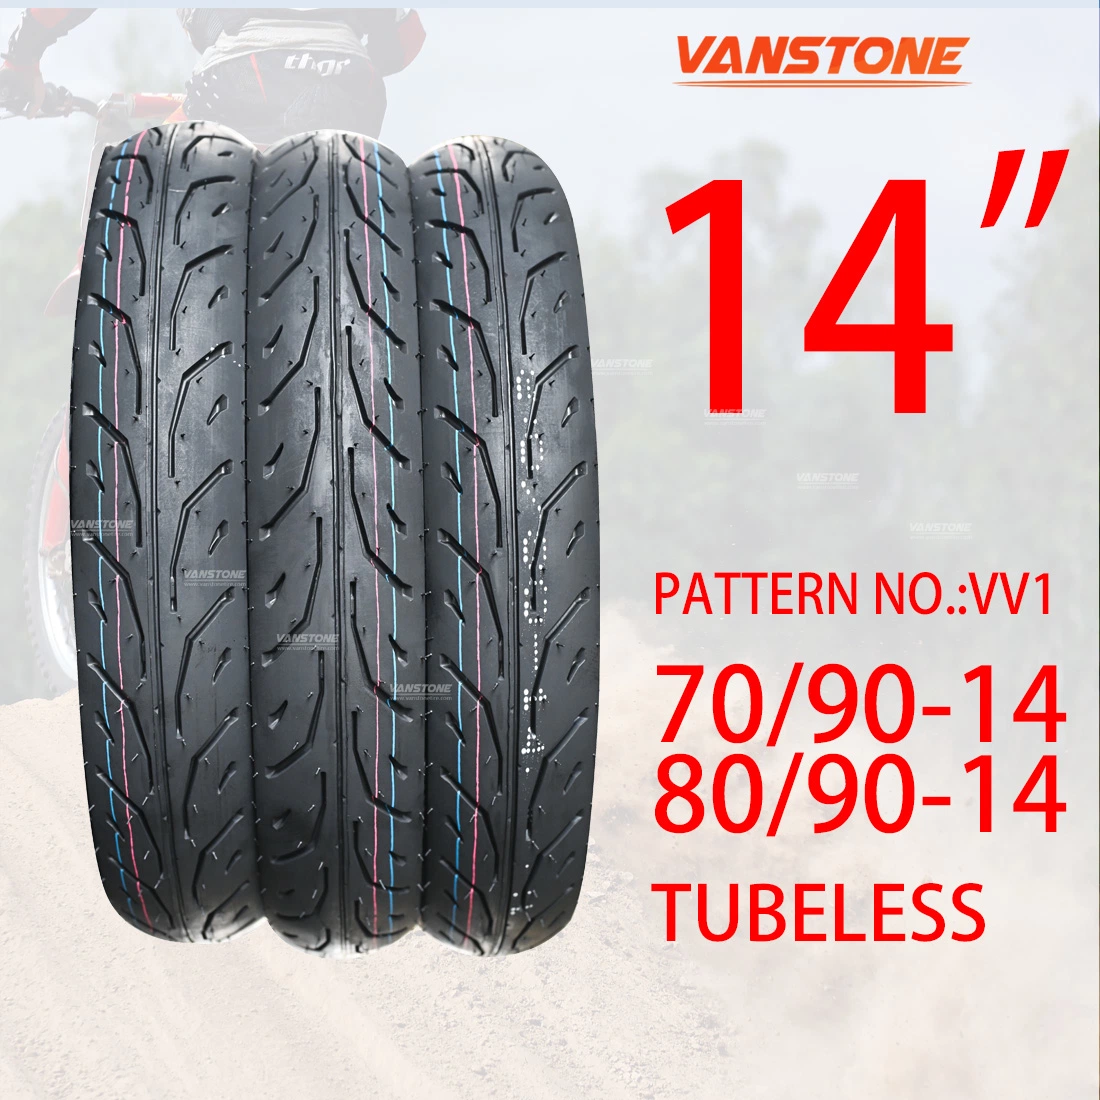 High Quality Cheap Price Tubeless 6pr/8pr Nylon Natural Rubber Tricycle 80/90-14 Motorcycle Tyre with Excellent Grip Ability